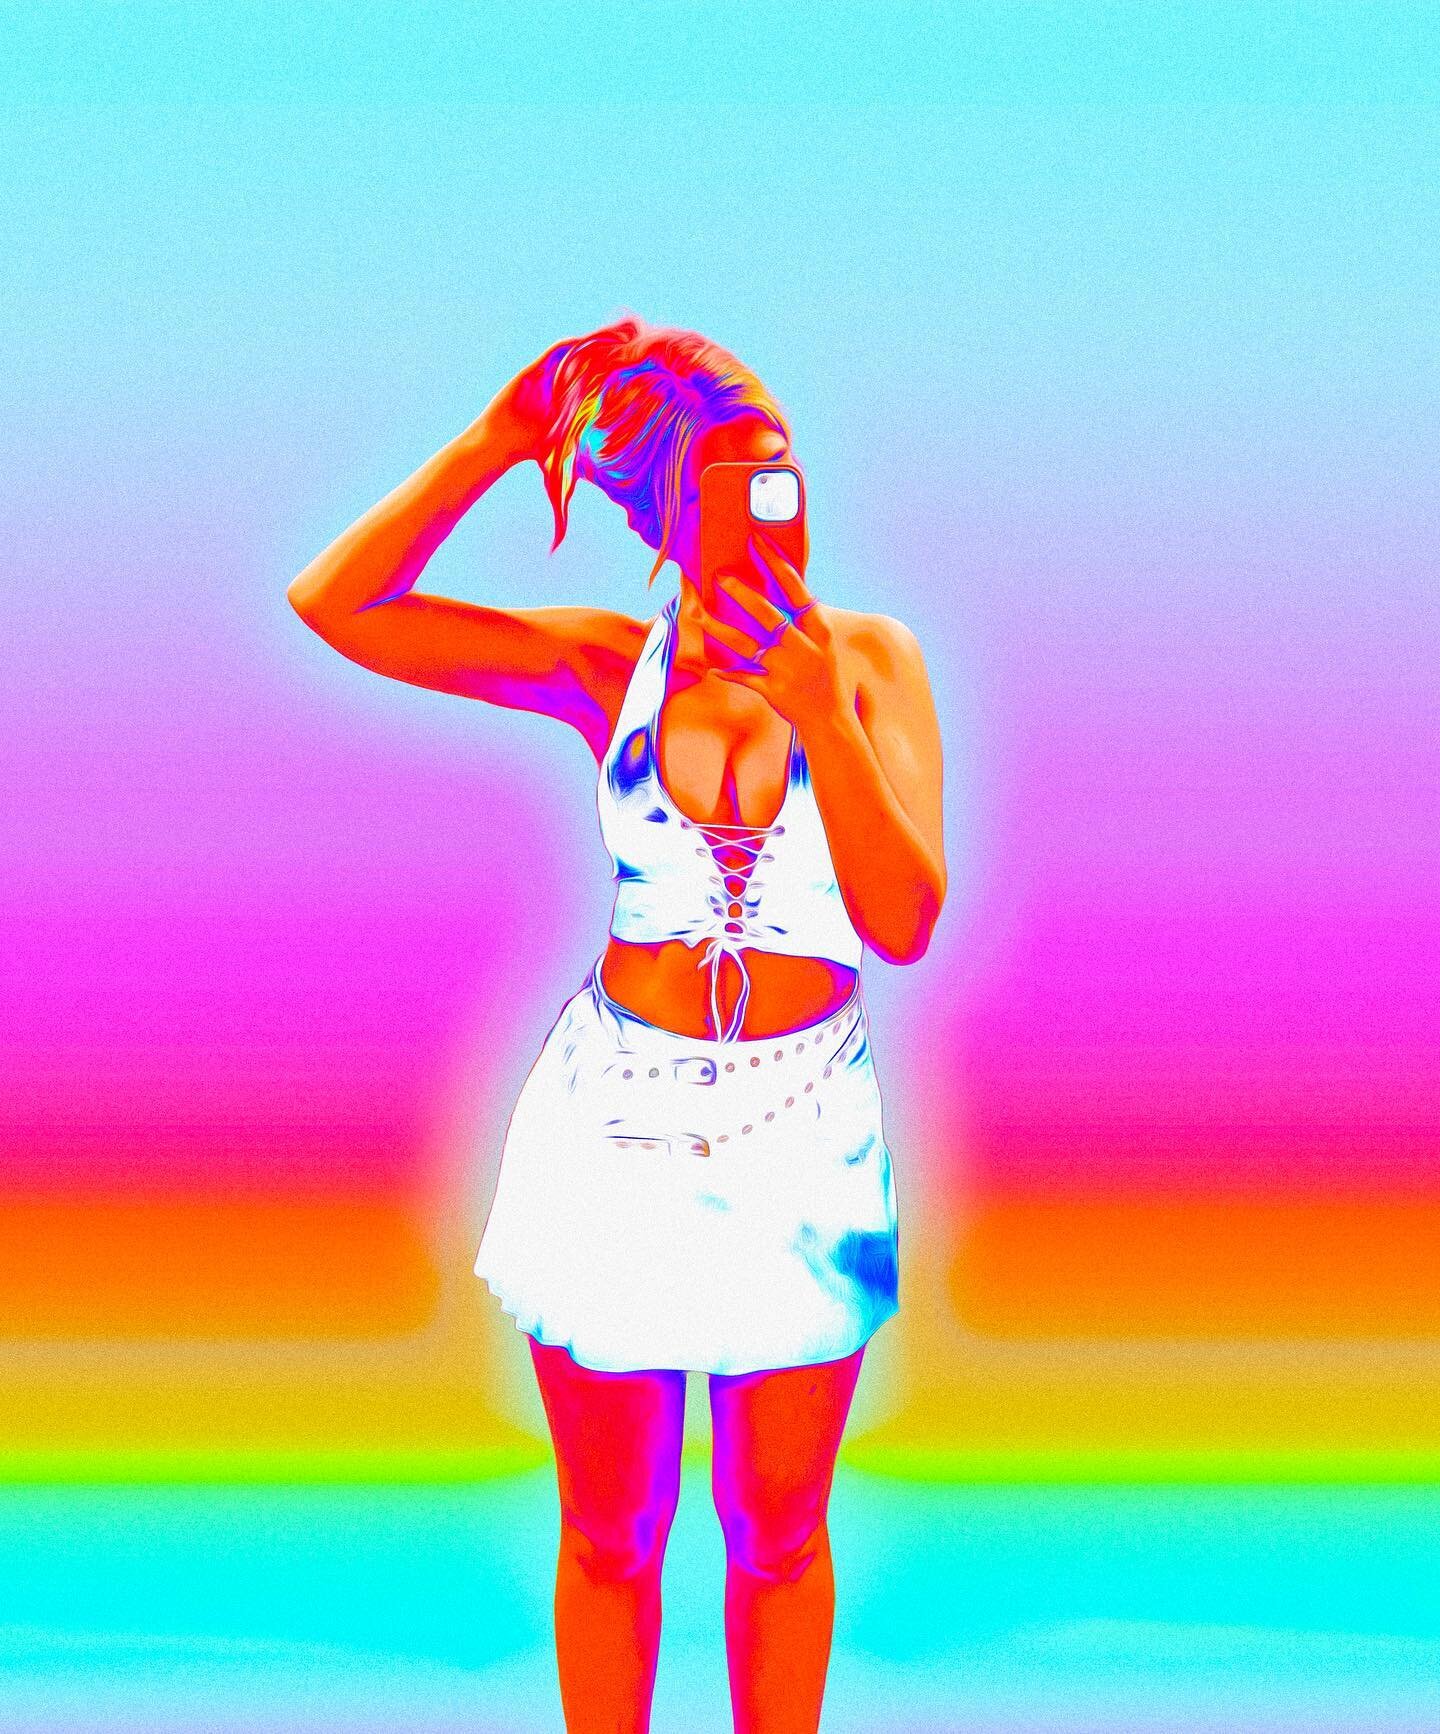 5 minute edit (: working on allowing myself to be me , finding my flow states. photoshop editing myself will always be my favorite way to do that - no idea where the edit is gonna go when I start but I trust myself and let it flow 🌈